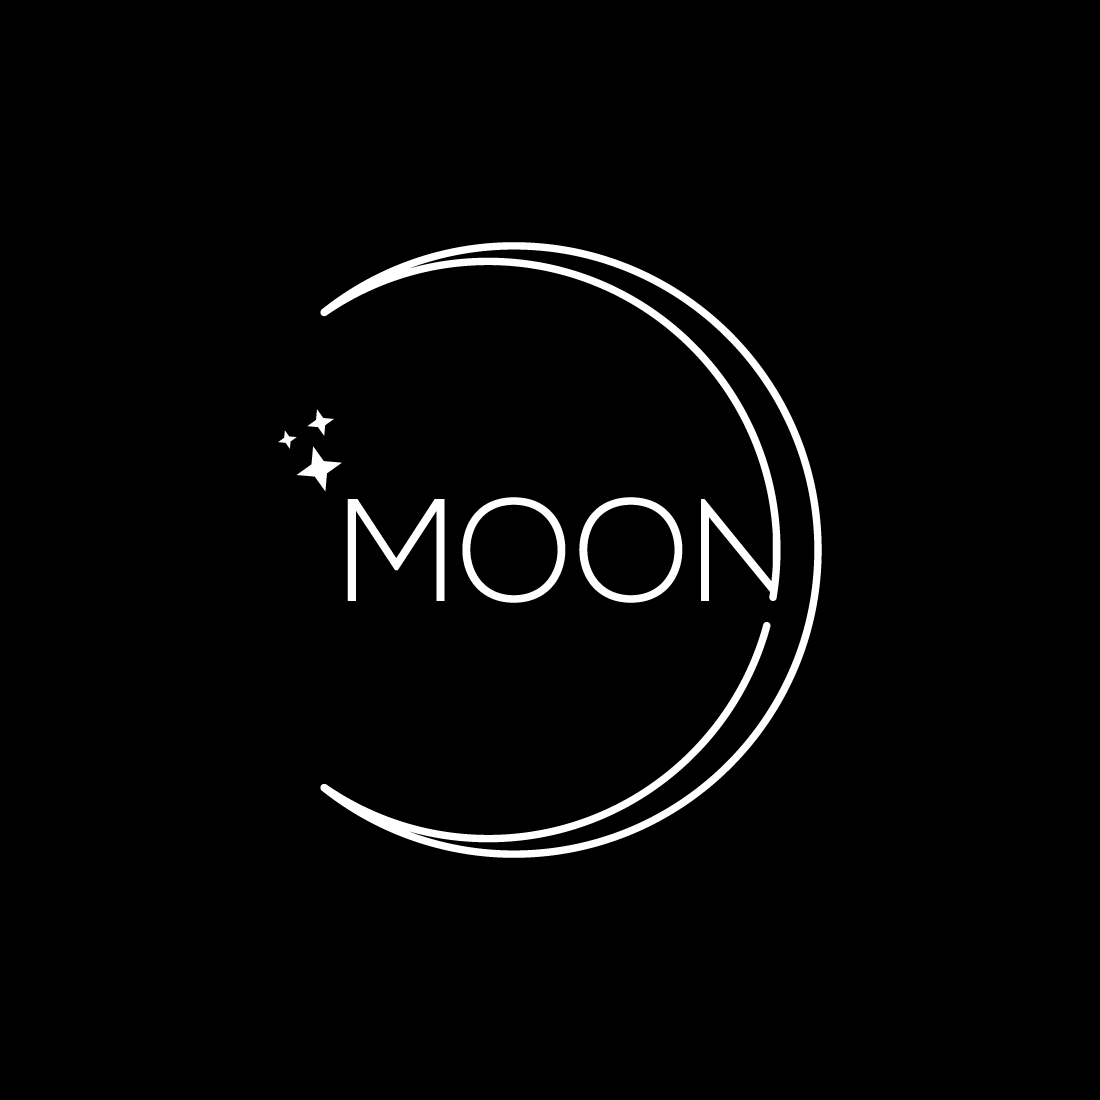 Moon Luxury logo preview image.